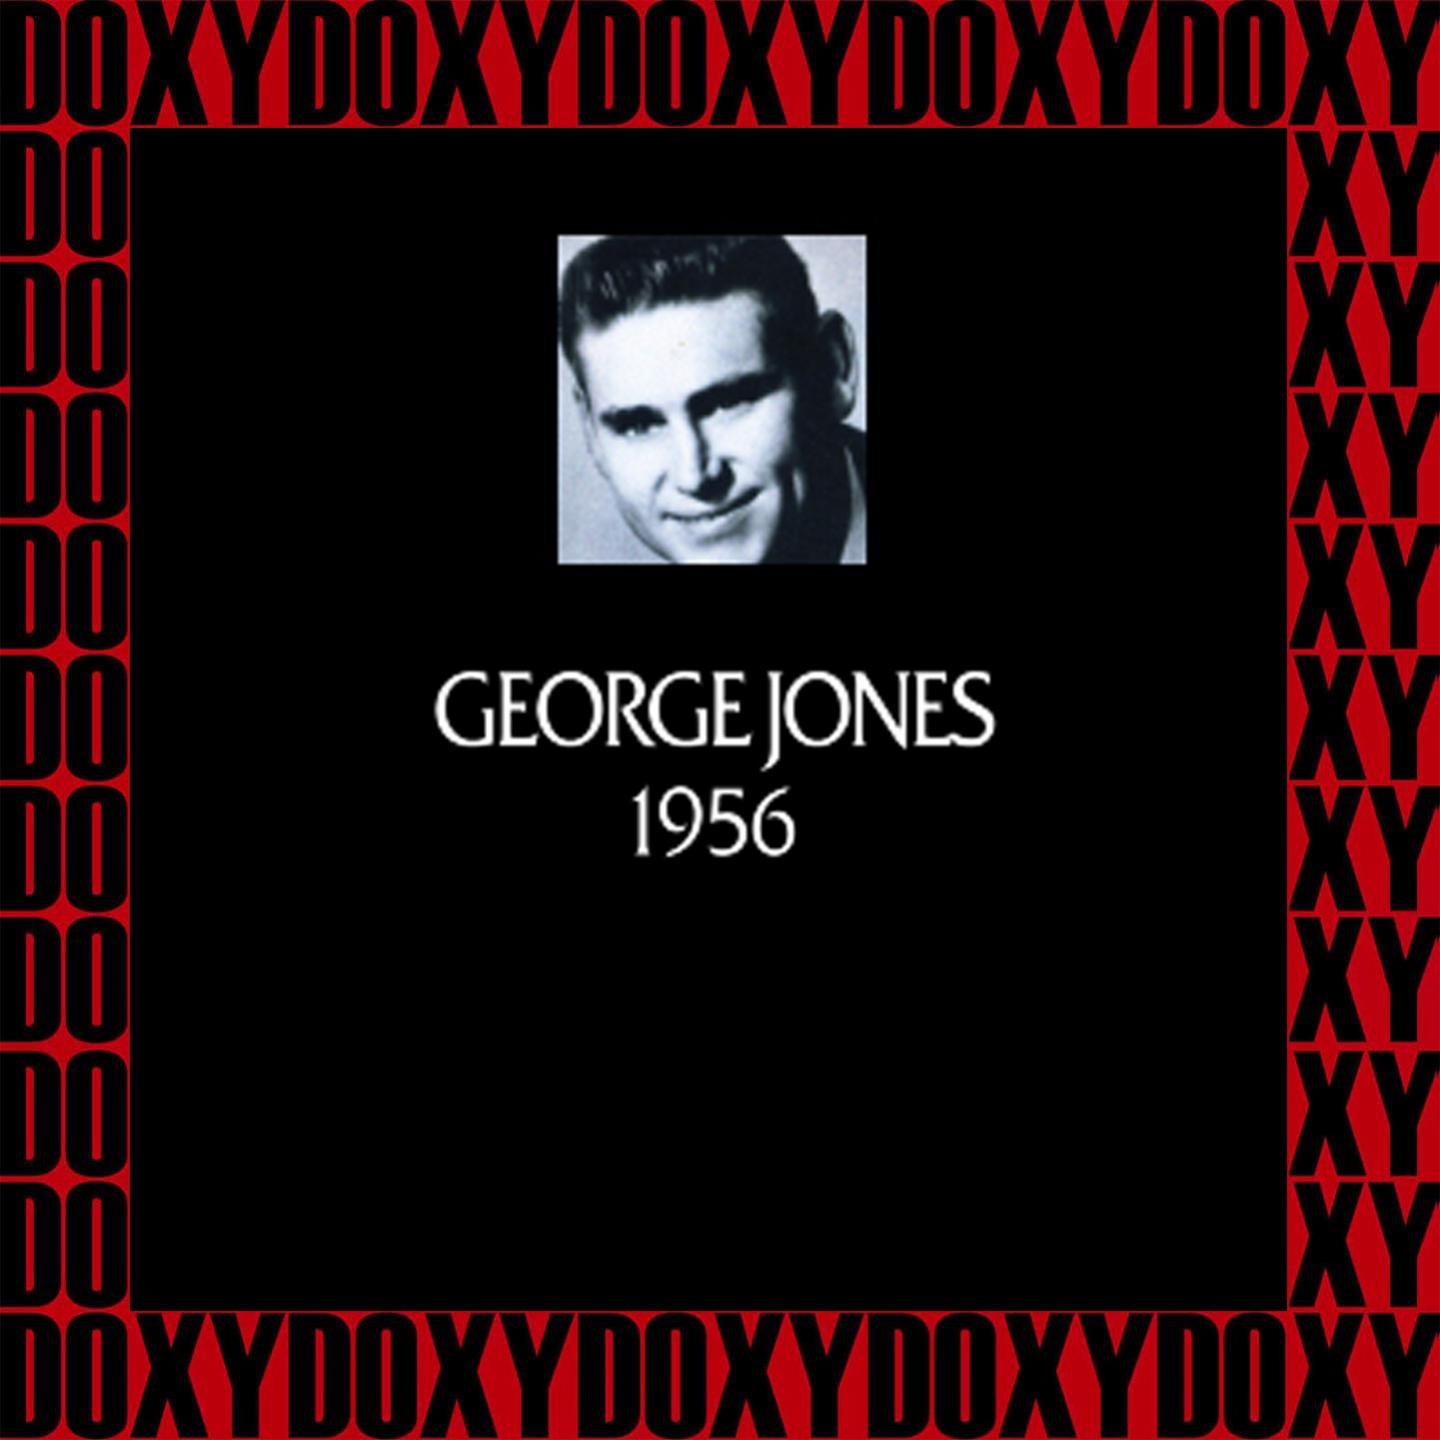 In Chronology - 1956 (Remastered Version) (Doxy Collection)